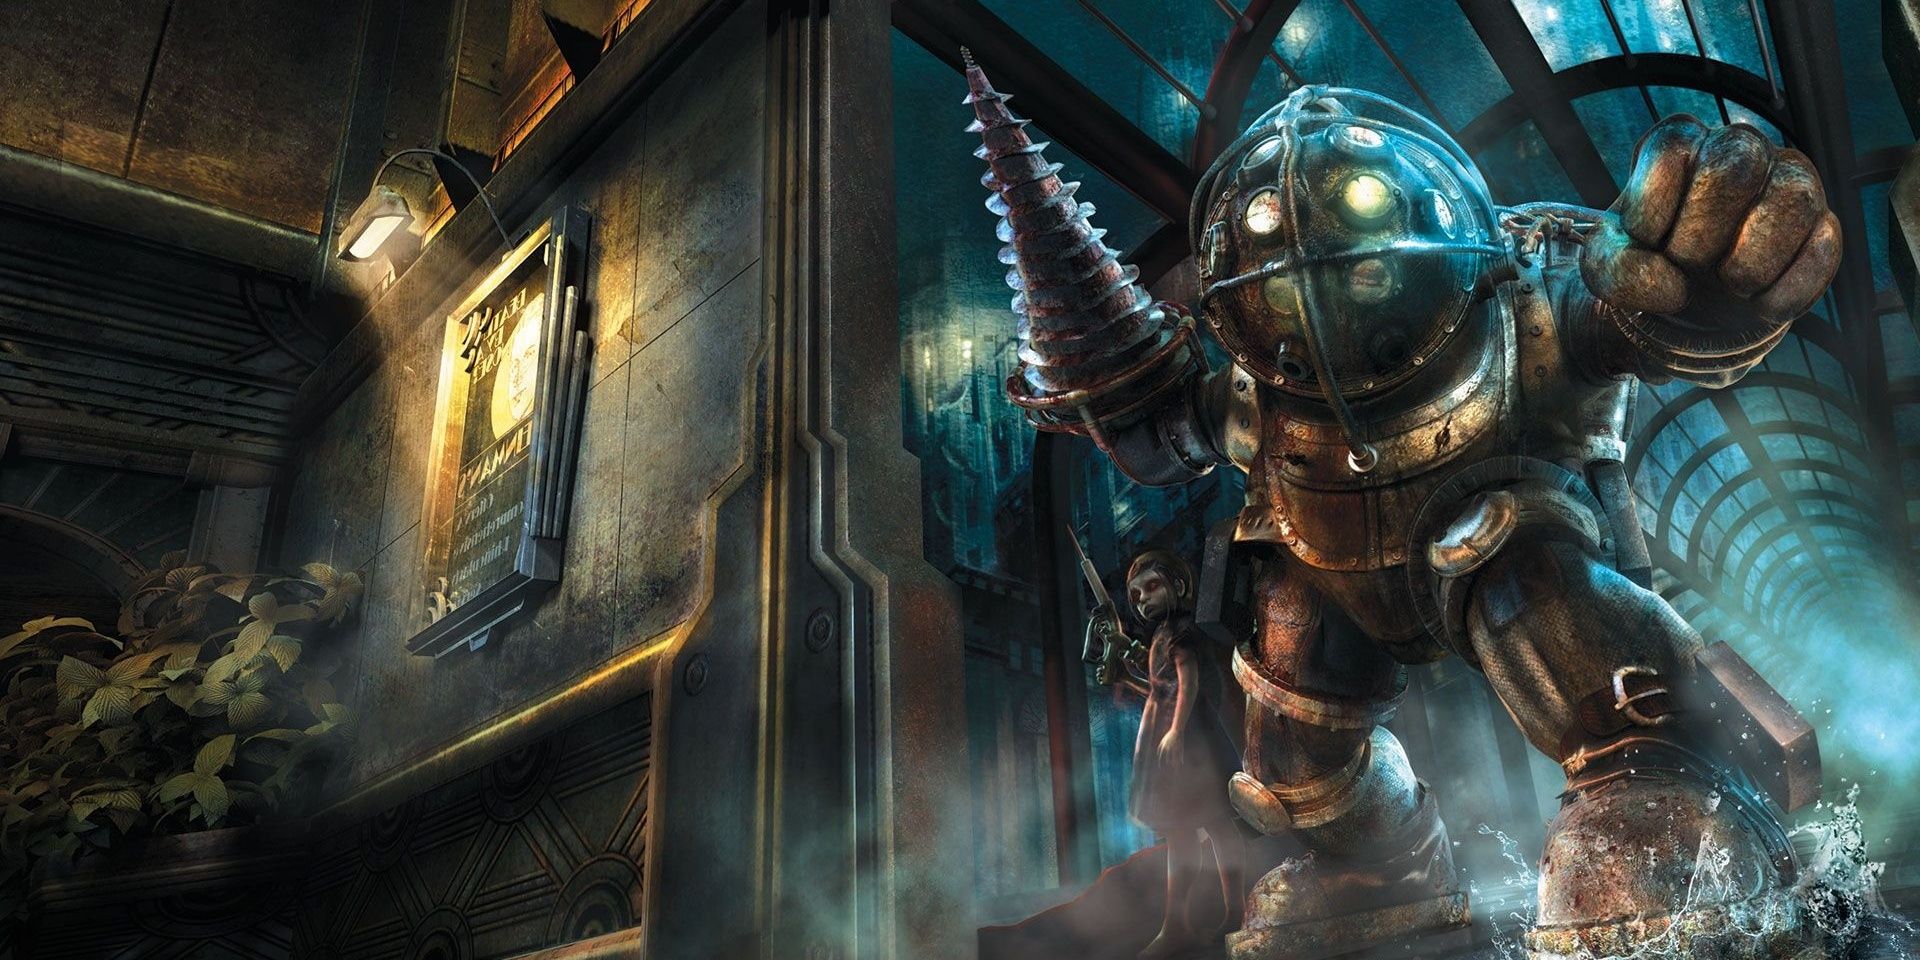 Big Daddy from the Bioshock series